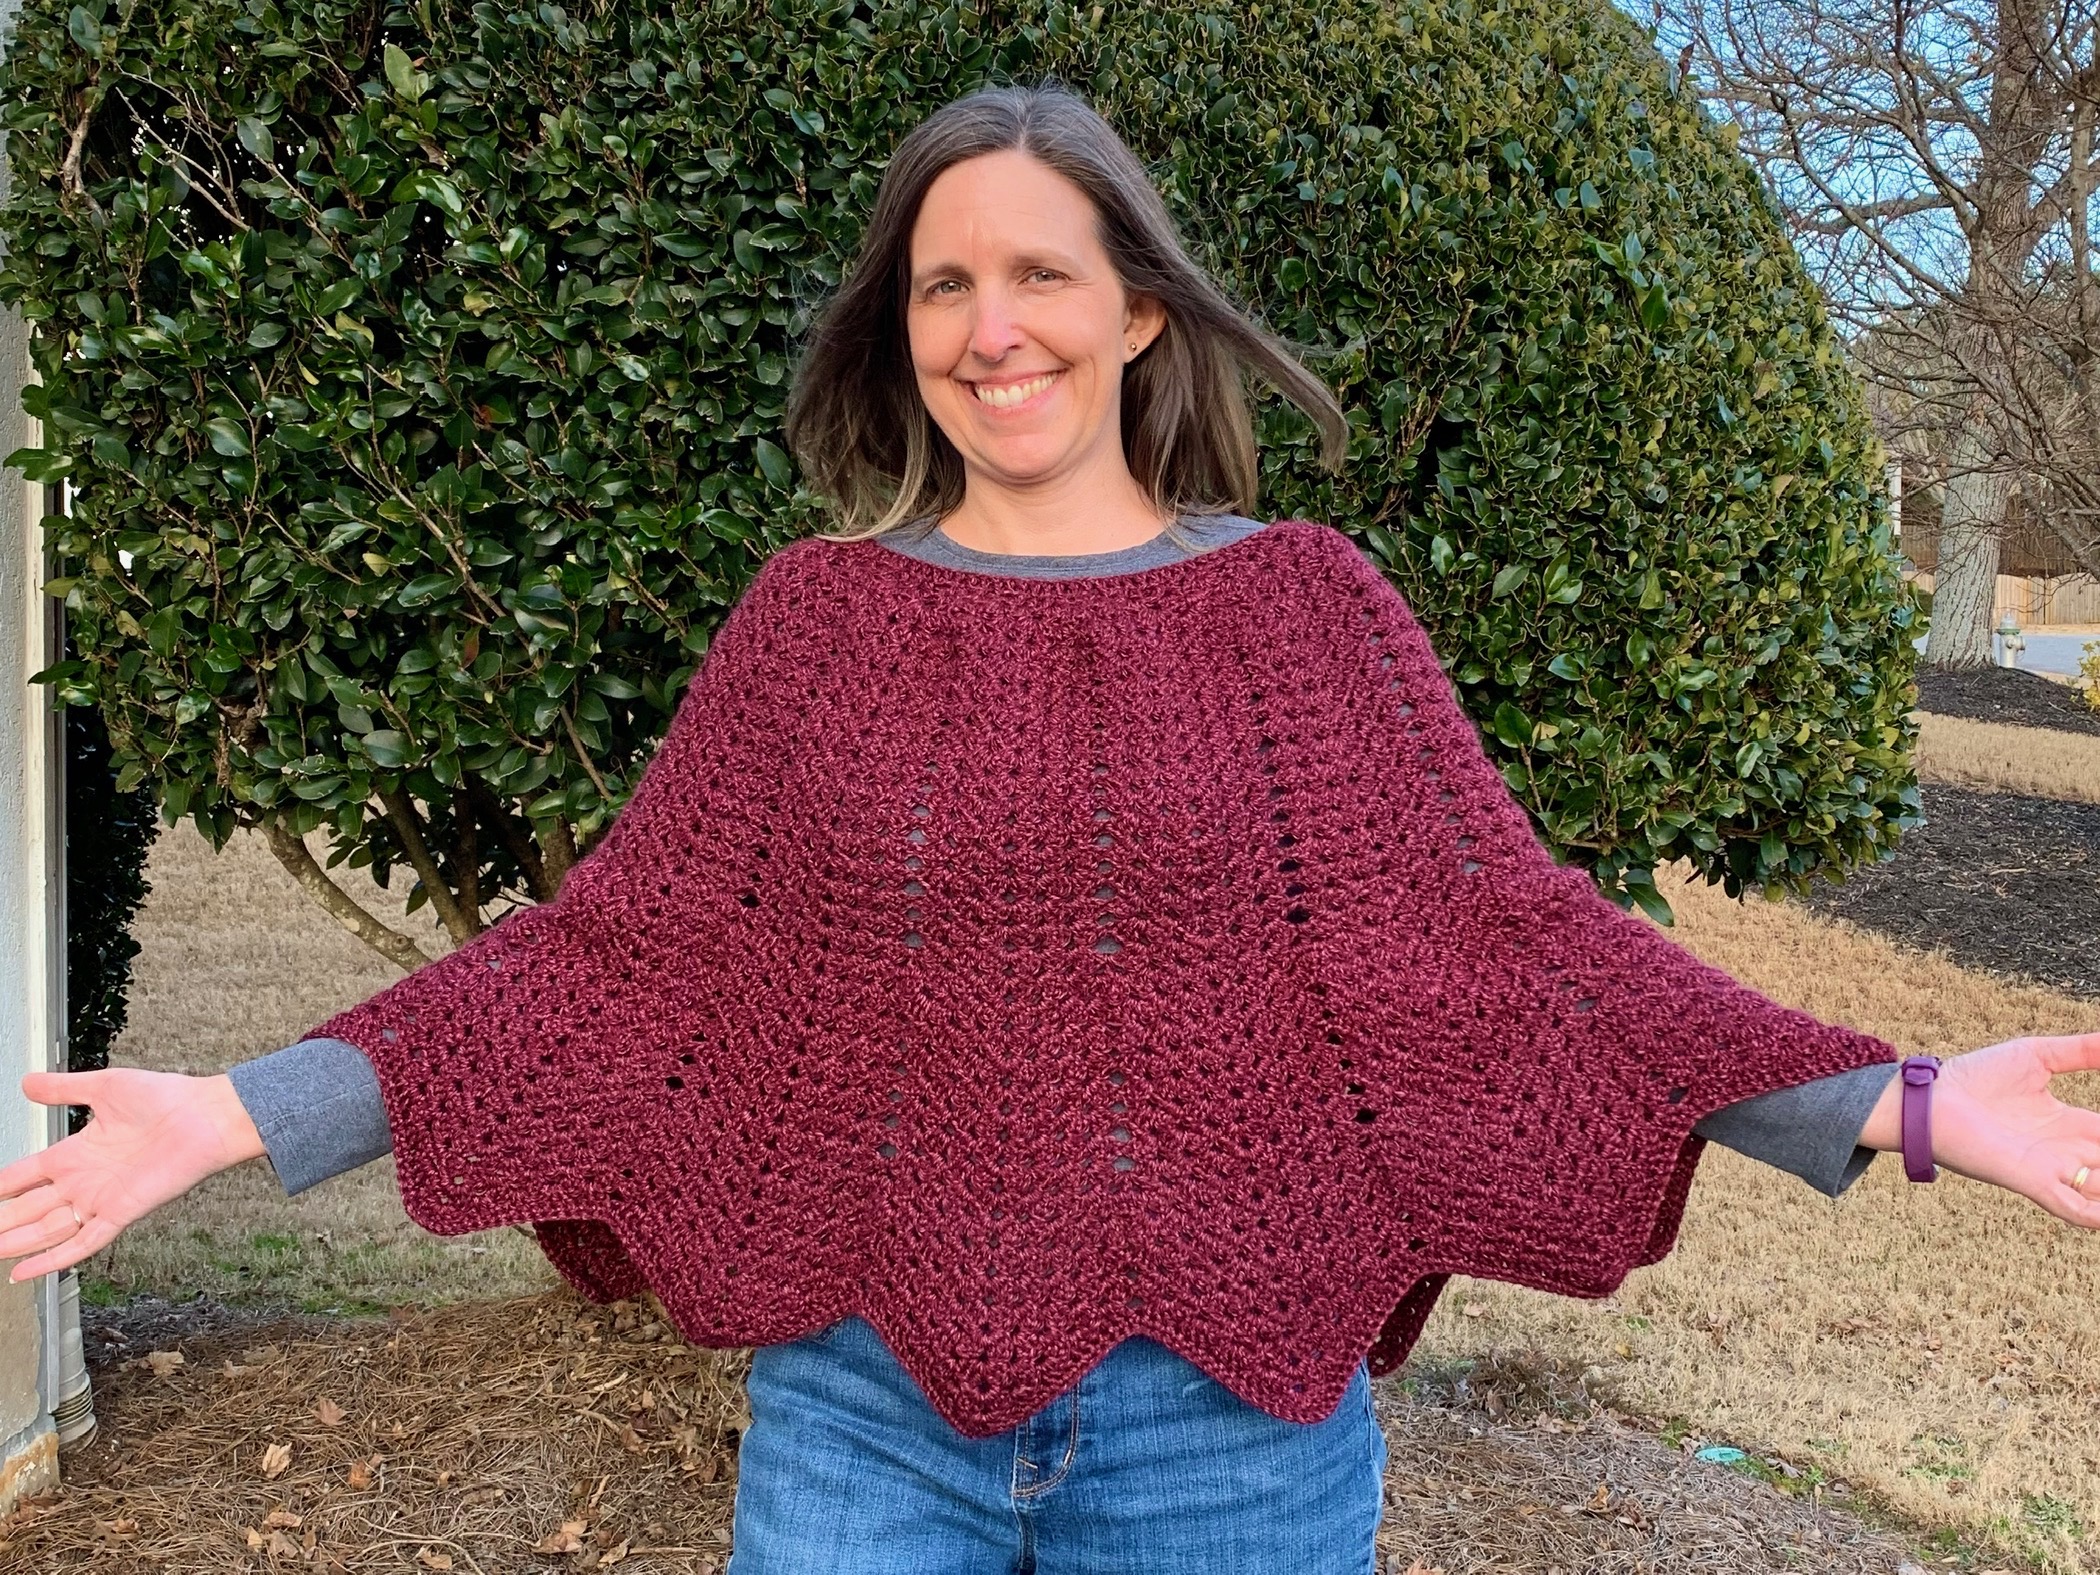 Designer wearing Granny Ripple Poncho with arms open